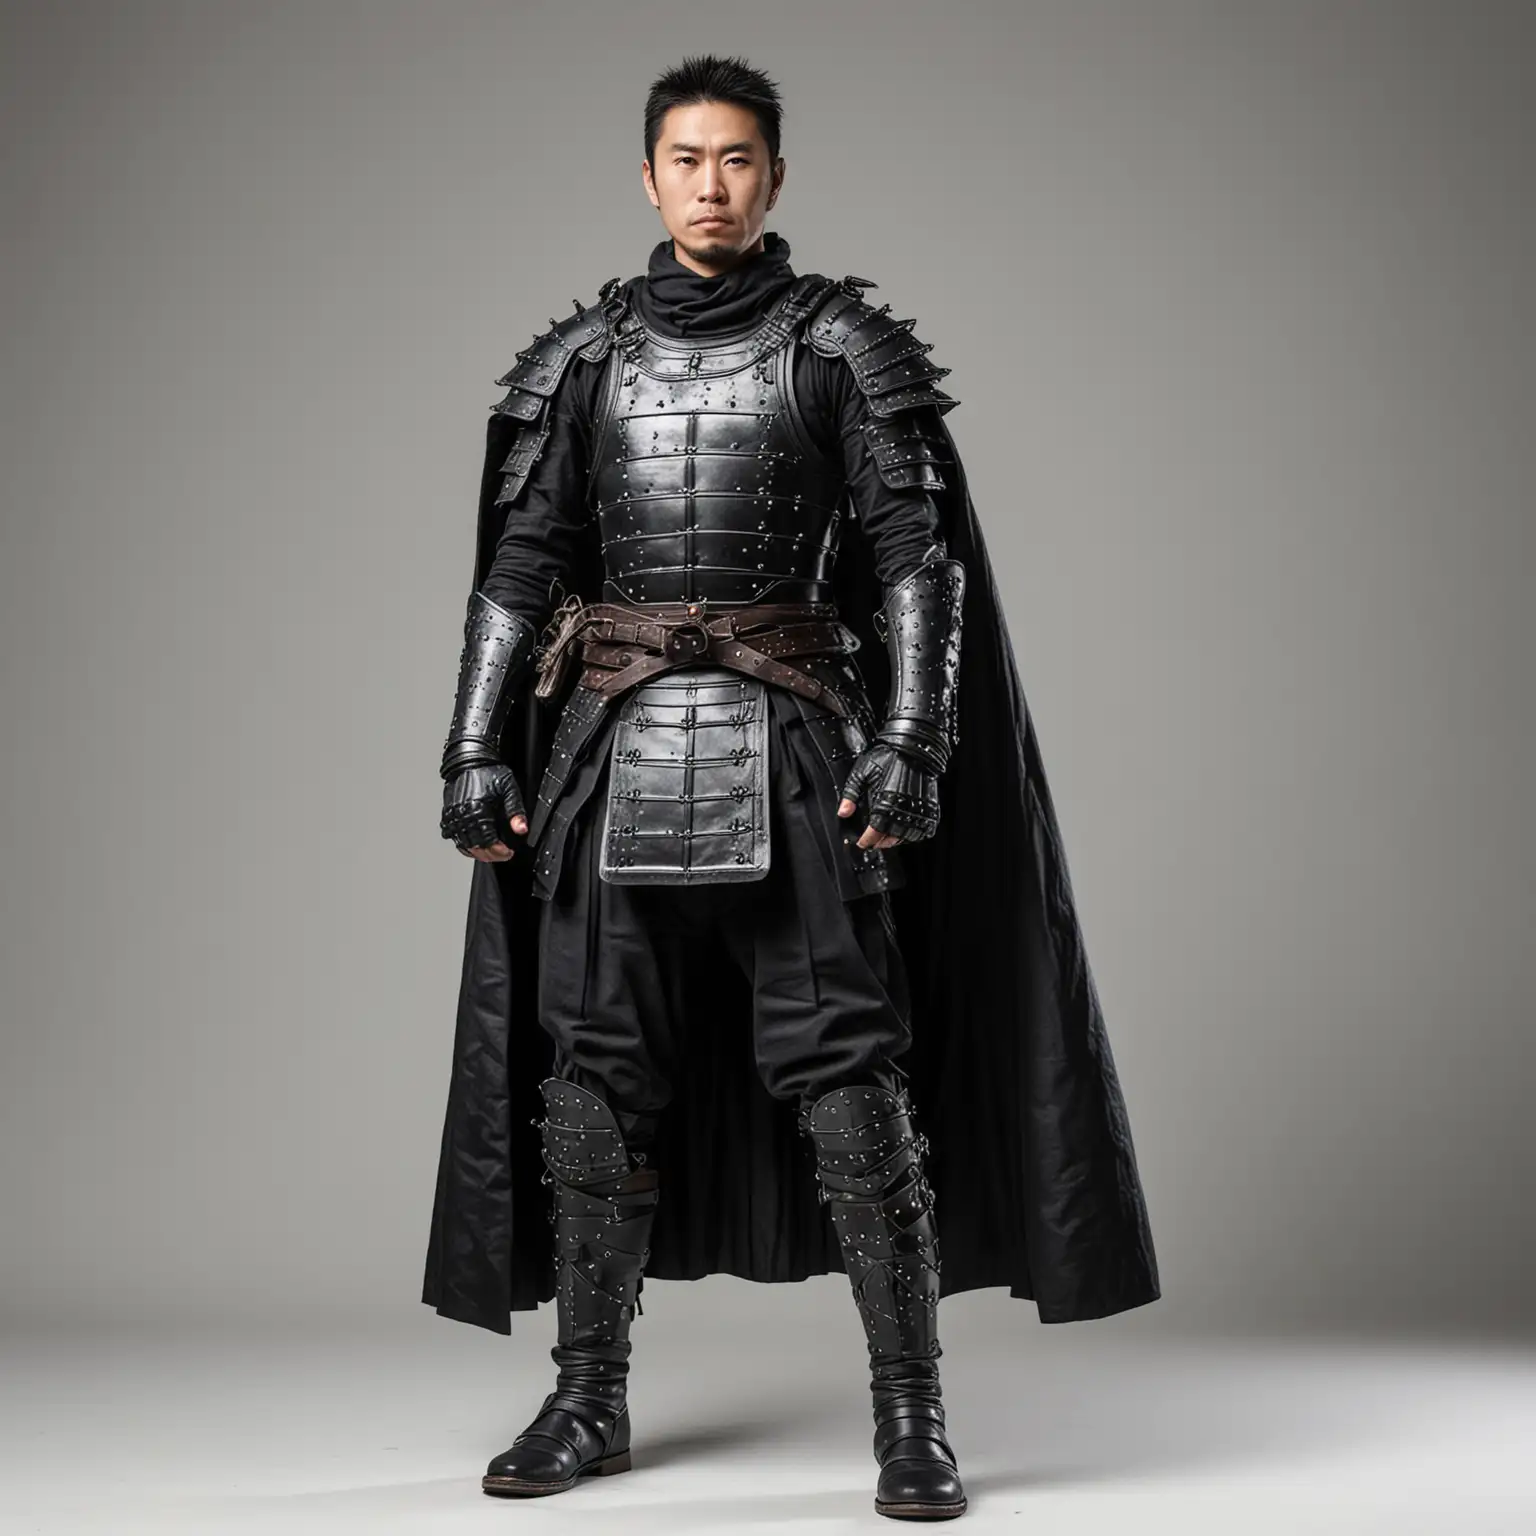 Strong Heroic Japanese SamuraiKnight in Black Armor and Cape